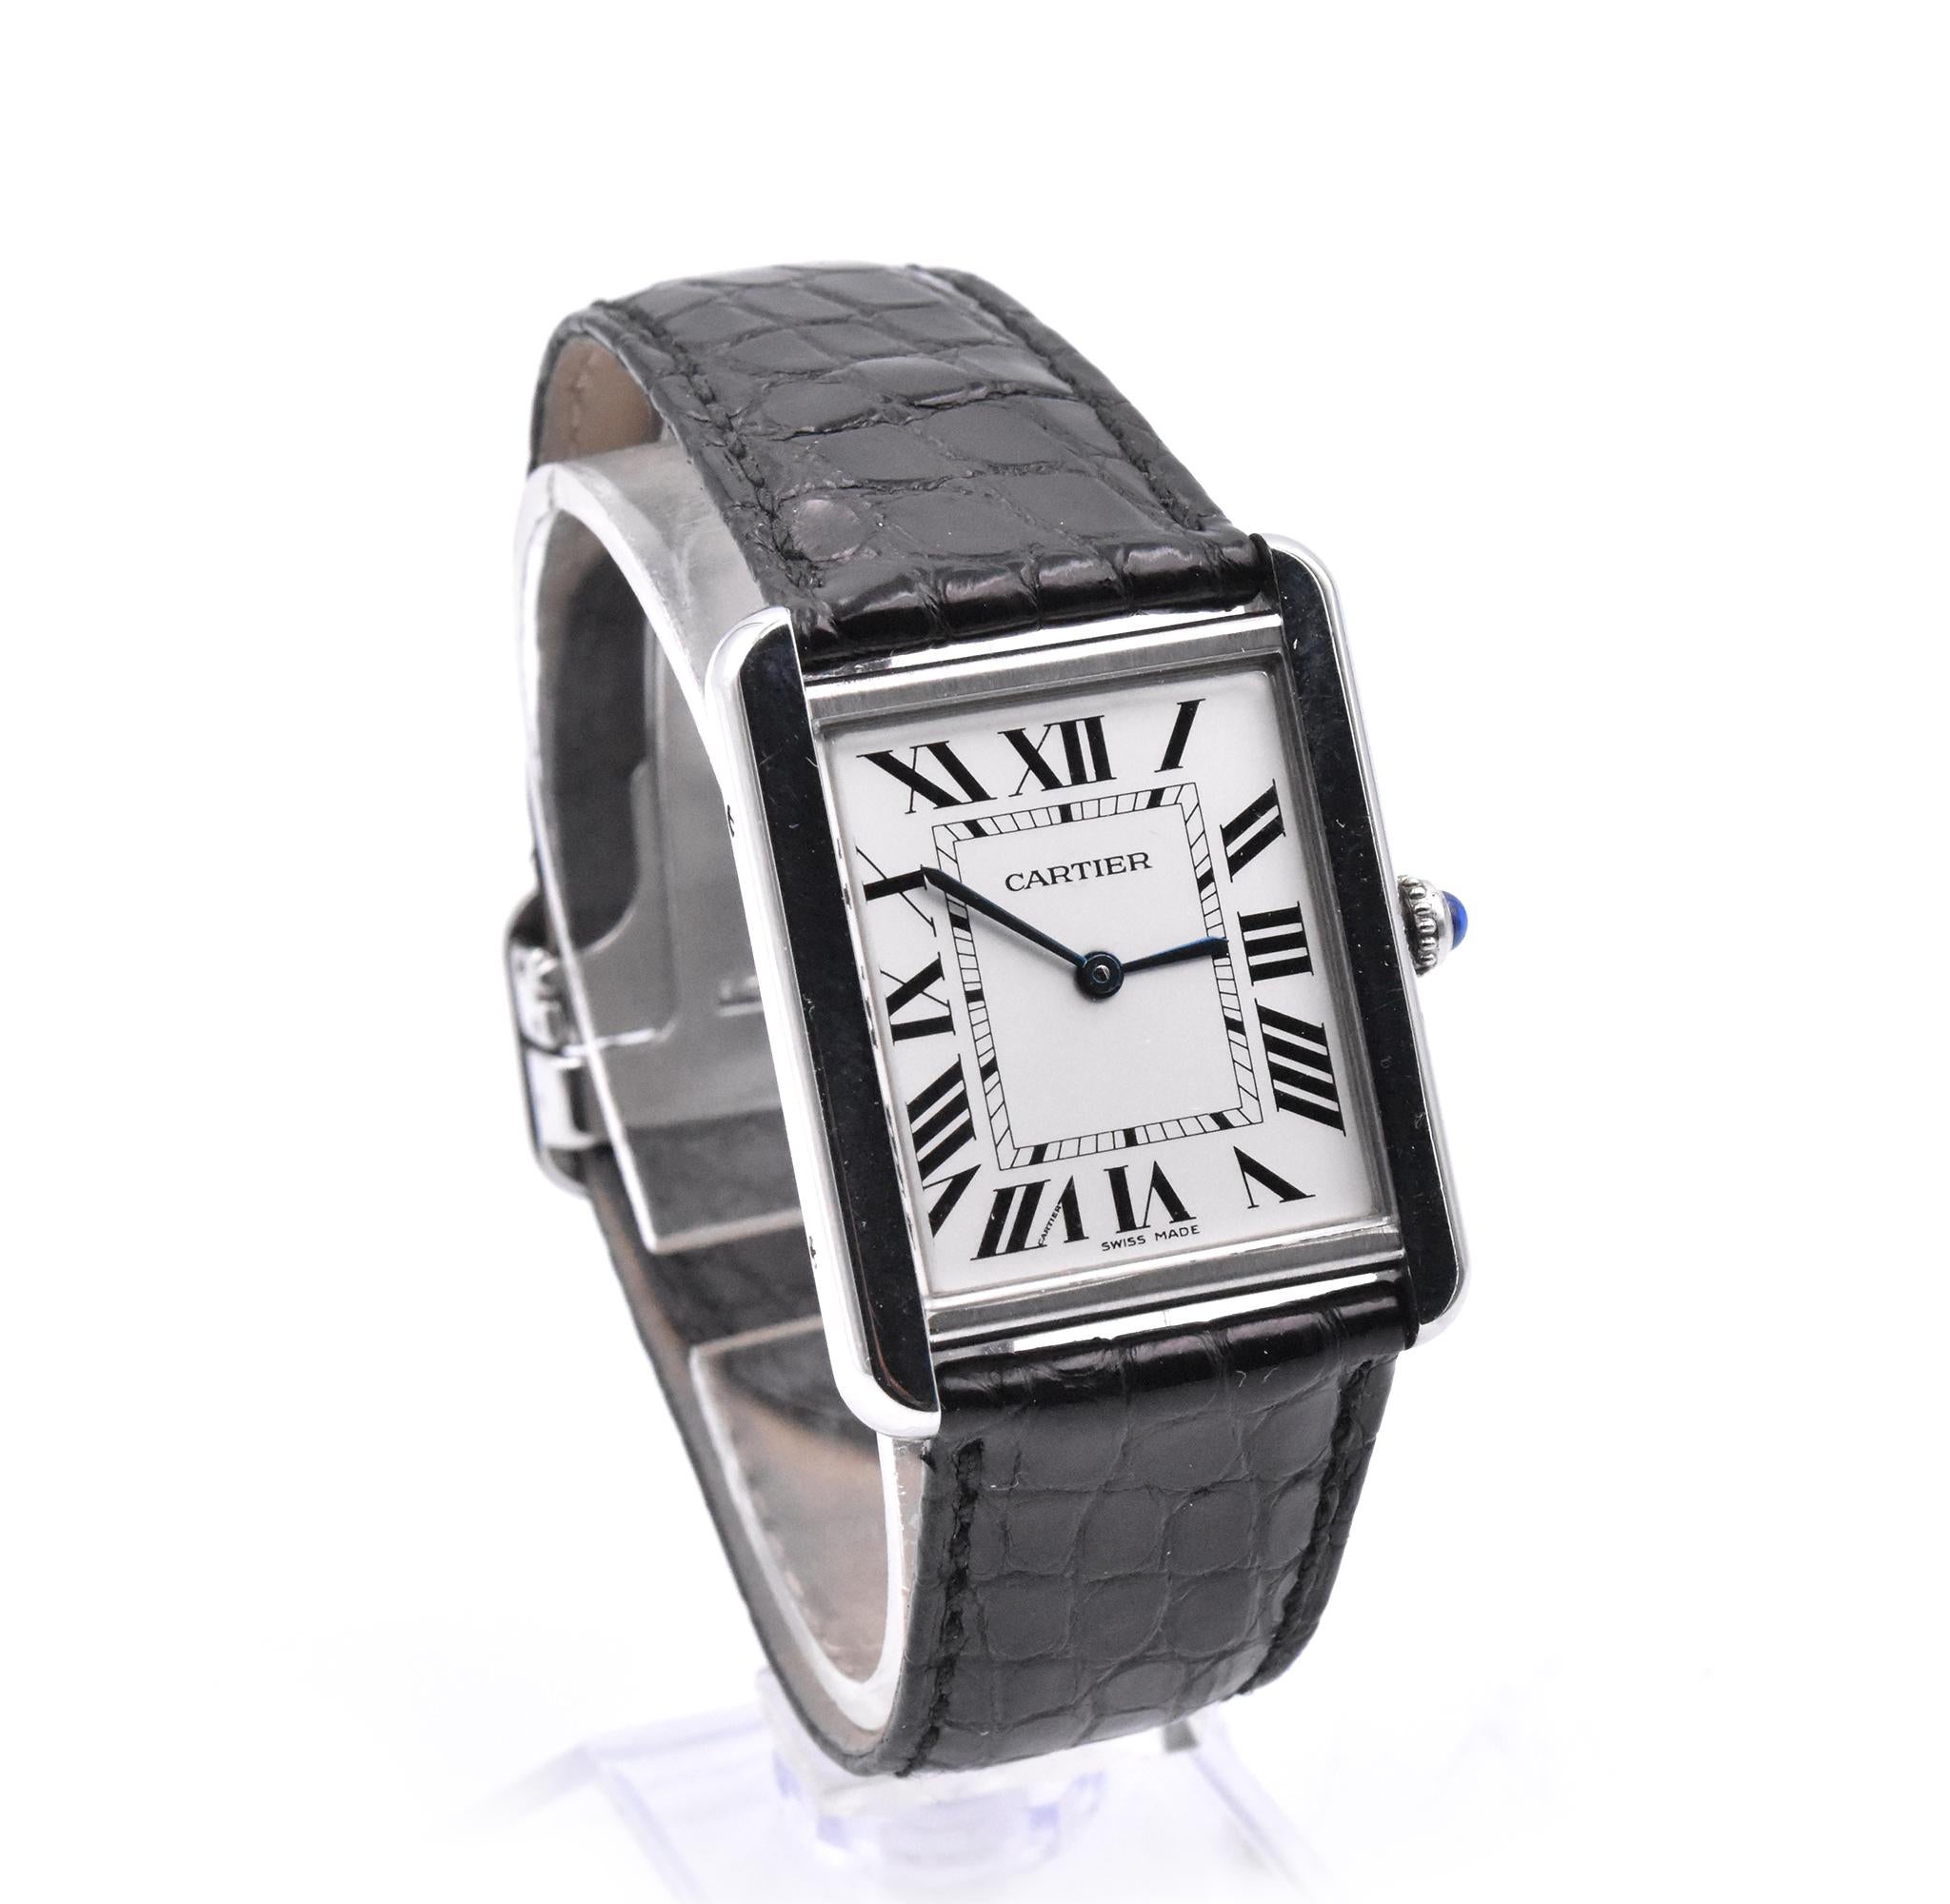 Movement: automatic
Function: hours, minutes
Case: 34.8 mm x 27.4 mm case, push pull crown, sapphire crystal
Dial: white dial, blue steeled hands, roman numeral hour markers
Band: Cartier leather band with butterfly clasp
Serial #: